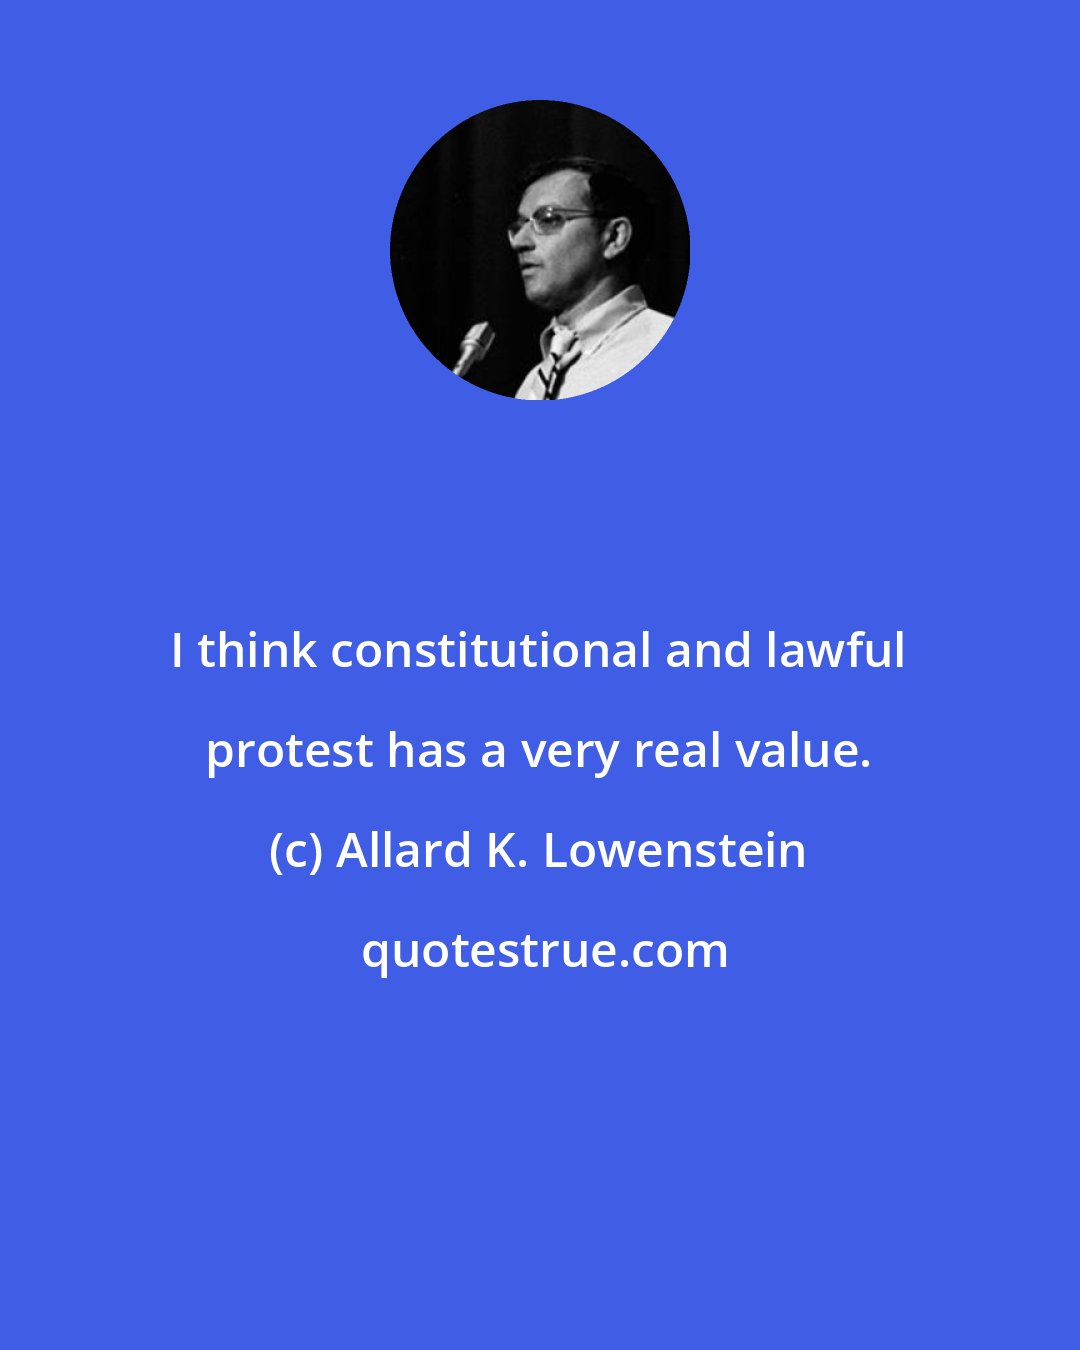 Allard K. Lowenstein: I think constitutional and lawful protest has a very real value.